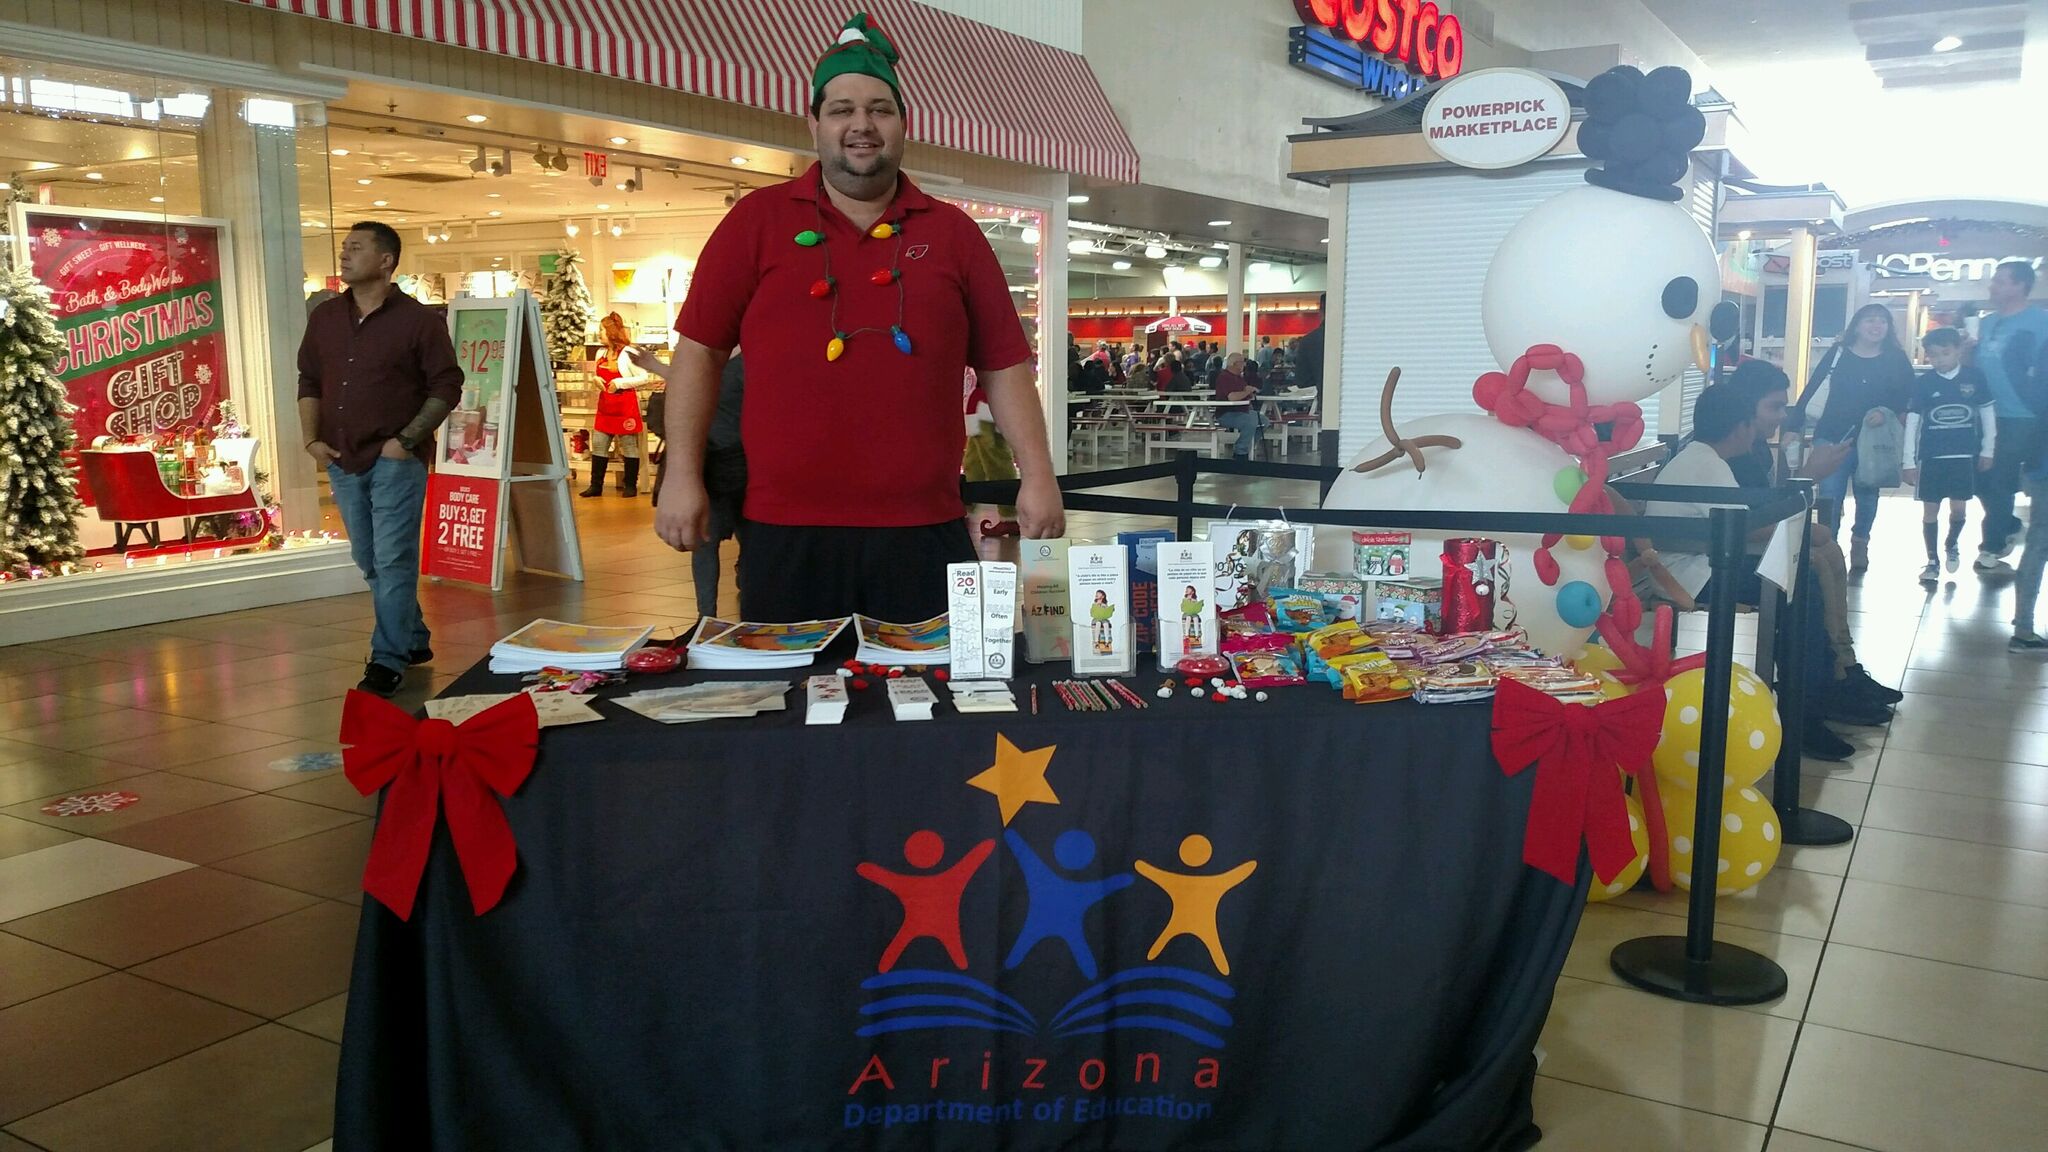 Man in red wearing elf hat stands in front of table with educational materials.